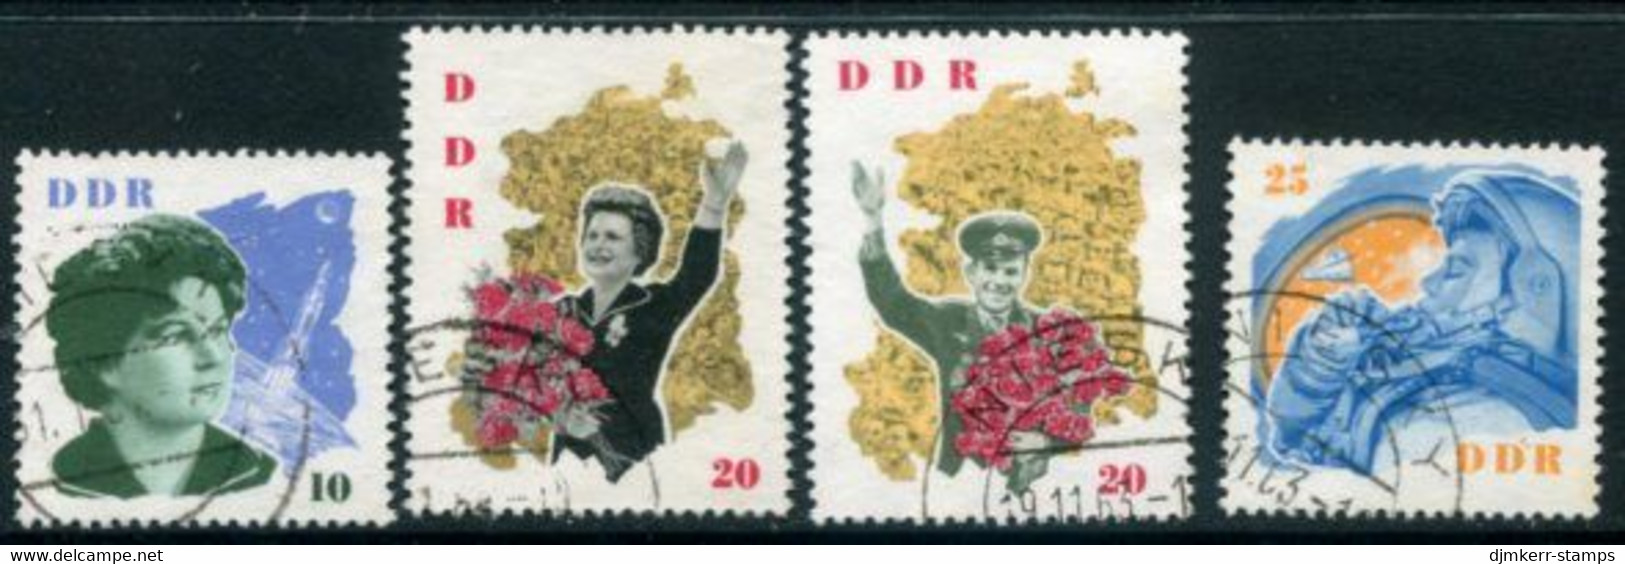 DDR / E. GERMANY 1963 Visit Of Soviet Astronauts Used.  Michel  993-96 - Usados